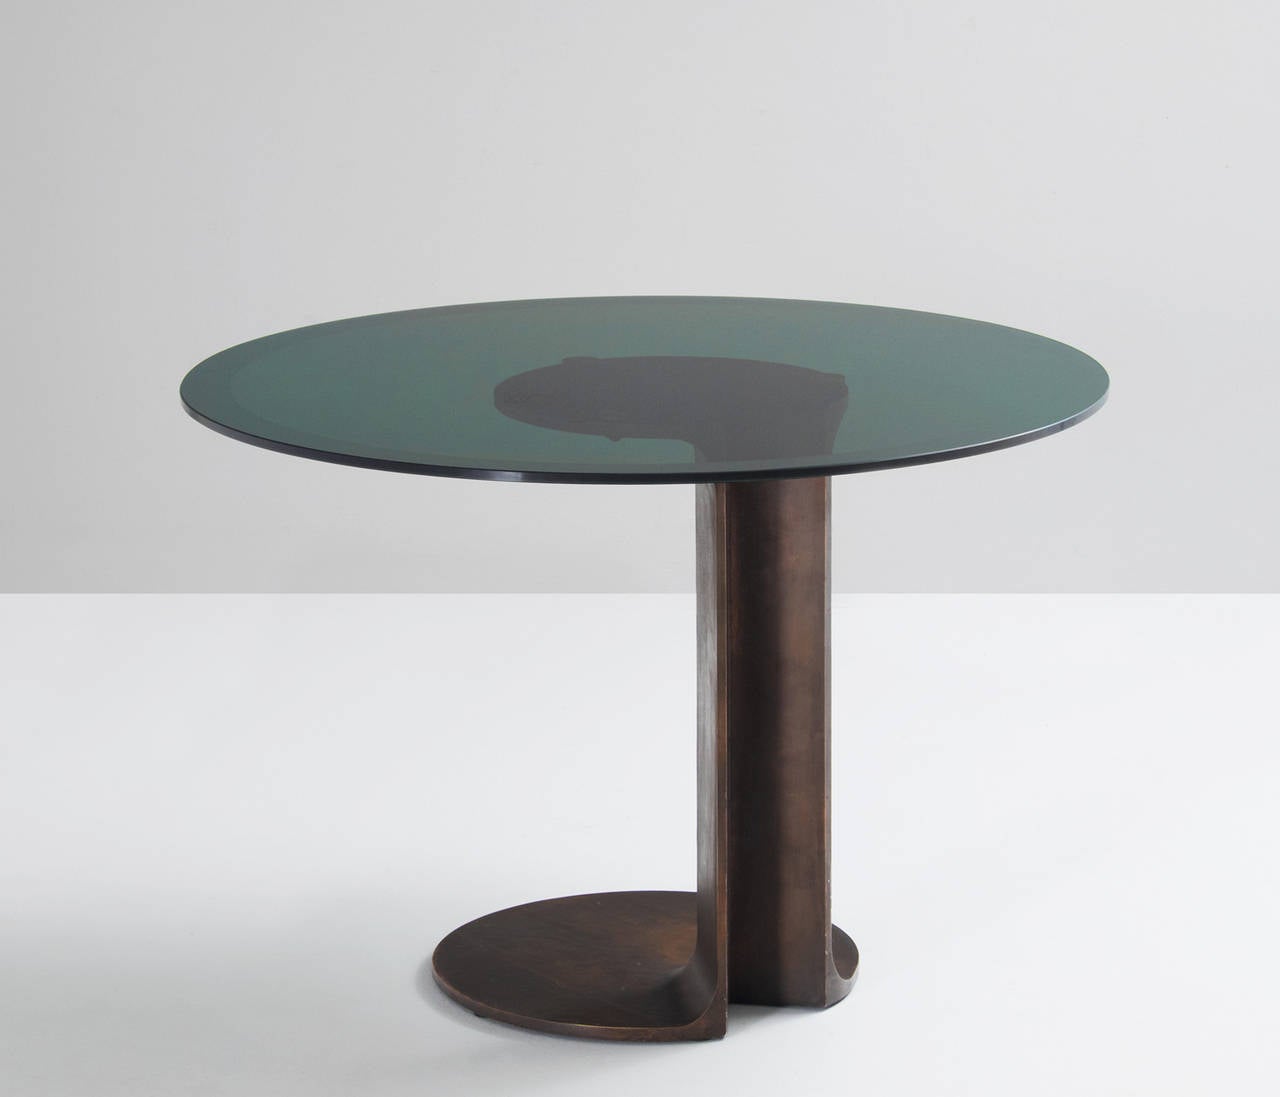 Bronze sculptural base and smoked glass top with sandblasted rinring

Unusual sculptural table, model TL 59 by Afra & Tobia Scarpa (born 1935, Italy) for Poggi. 

The elegant shape of the bronze base, is stunning. The smart design of the cast